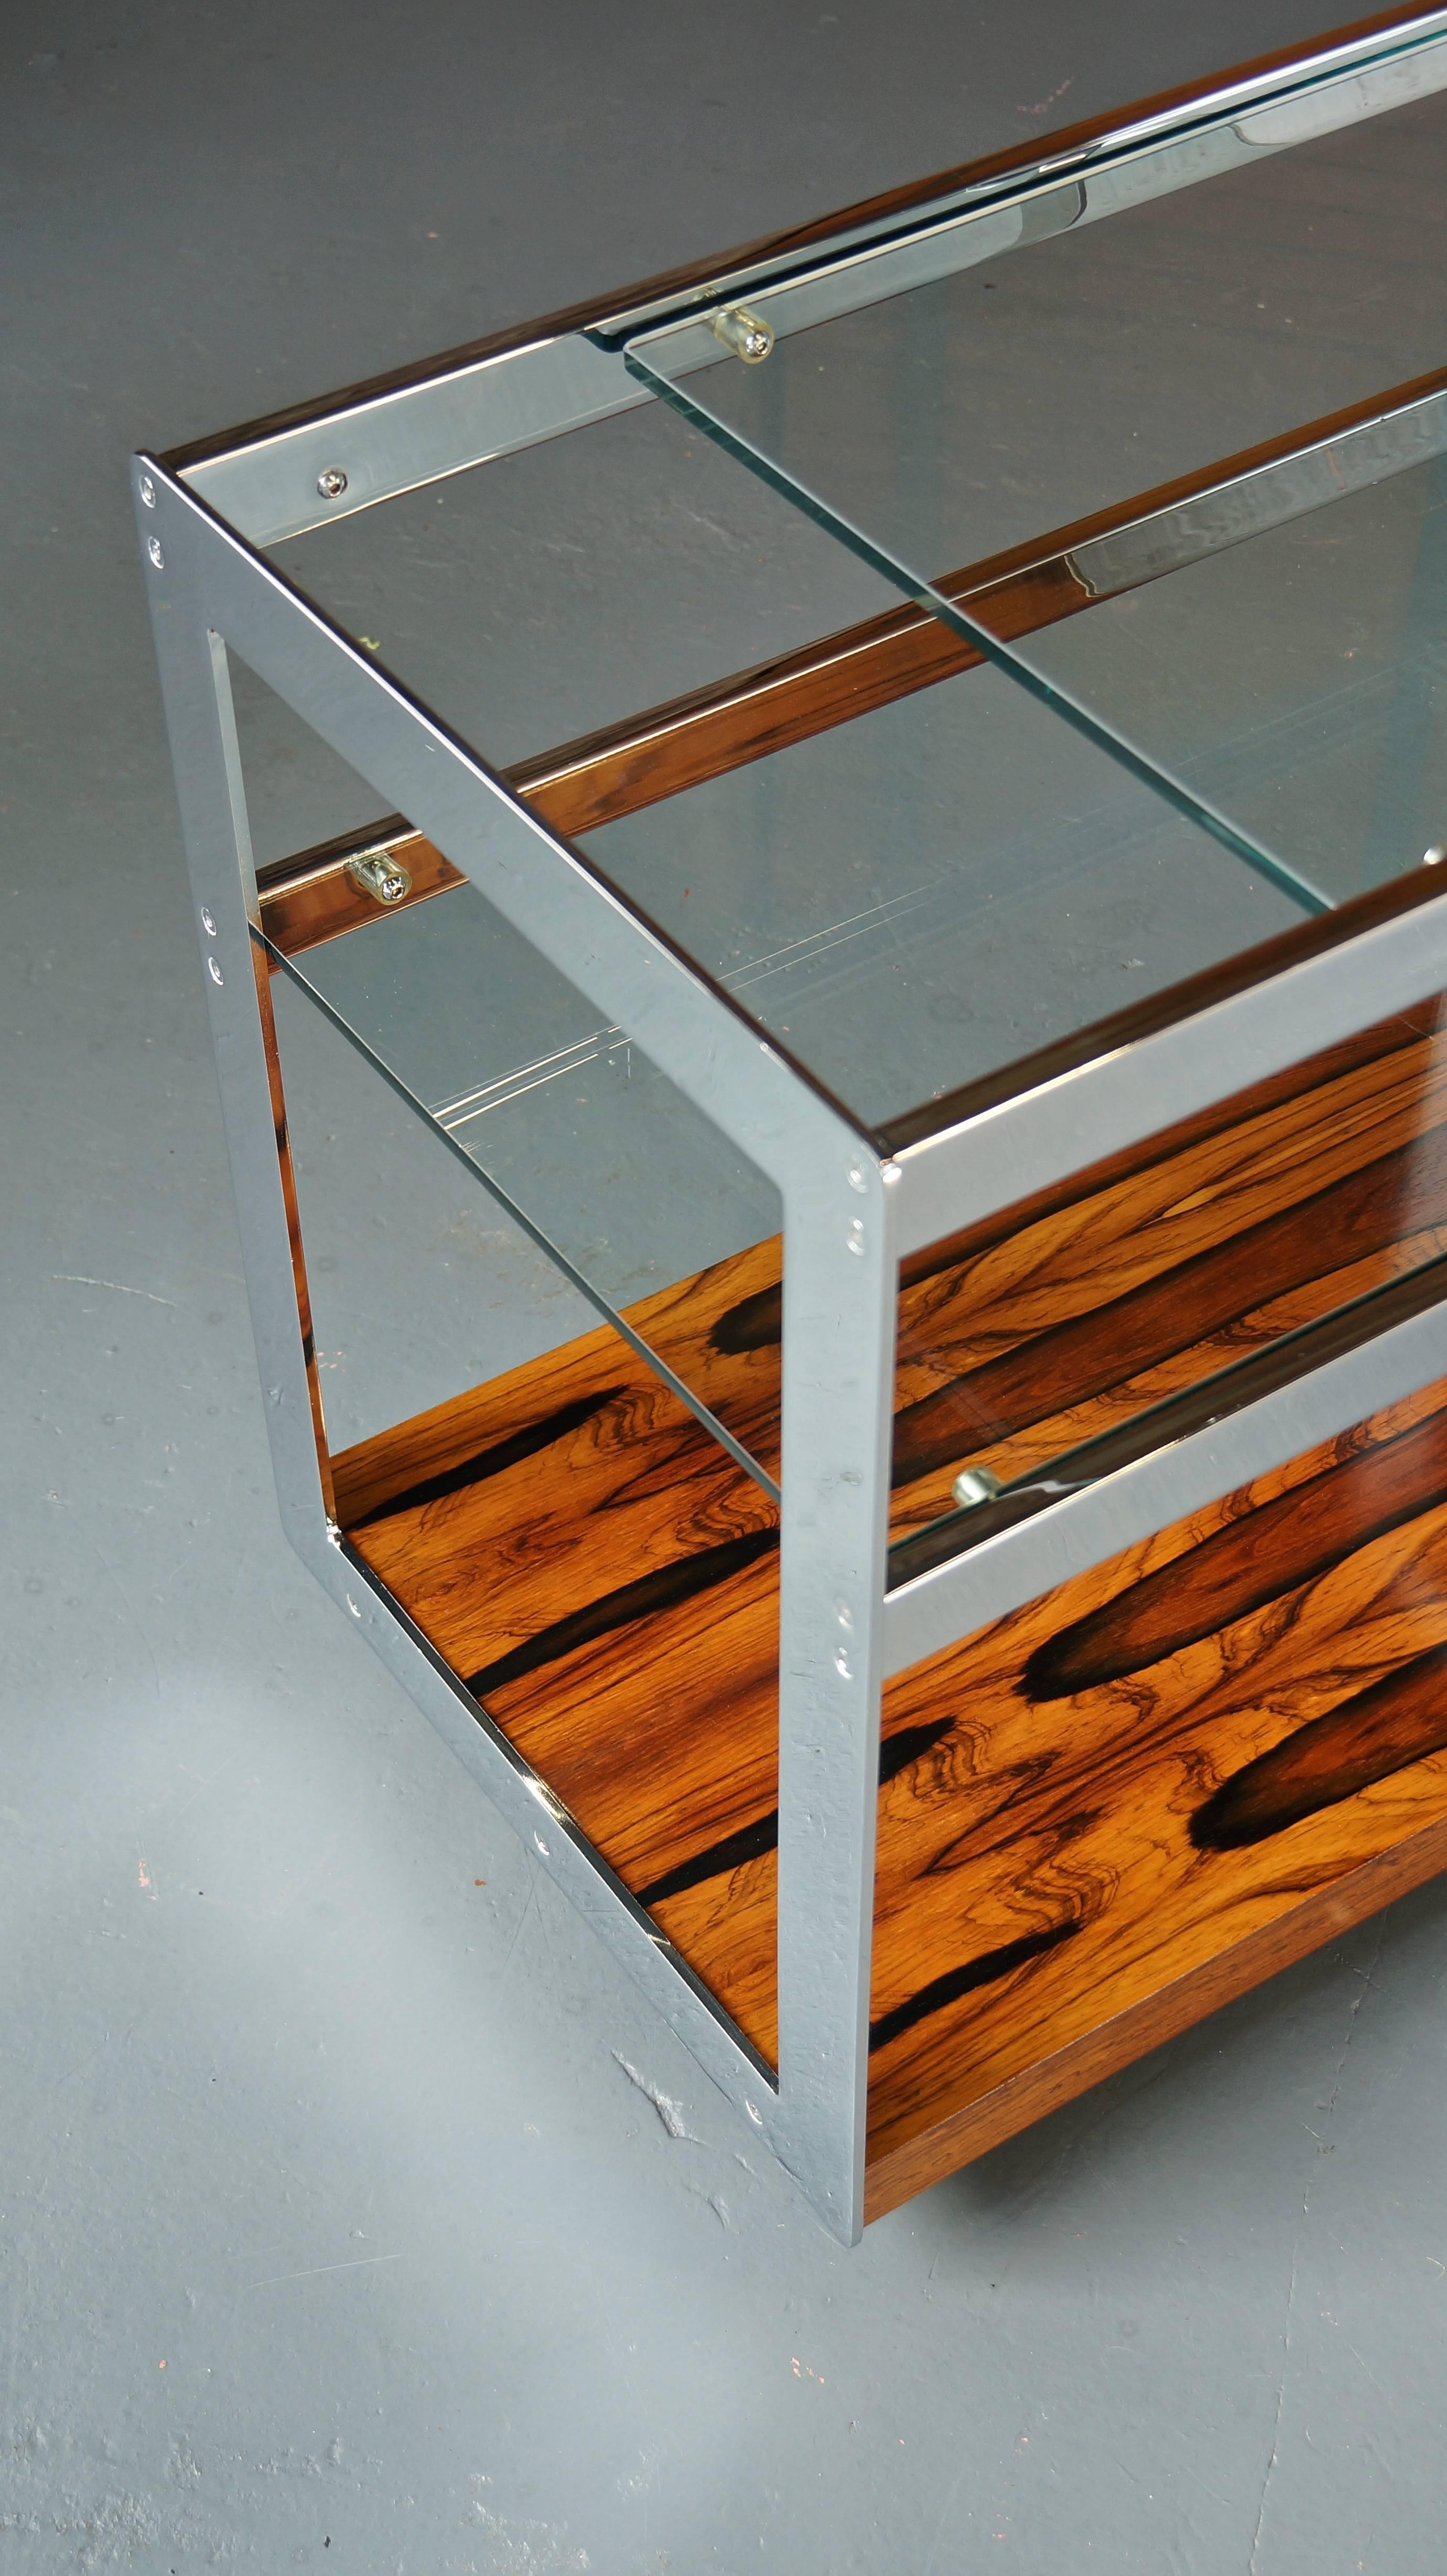 Late 20th Century 1970s Chrome and Rosewood Bar Cart or Trolley Richard Young Merrow Associates